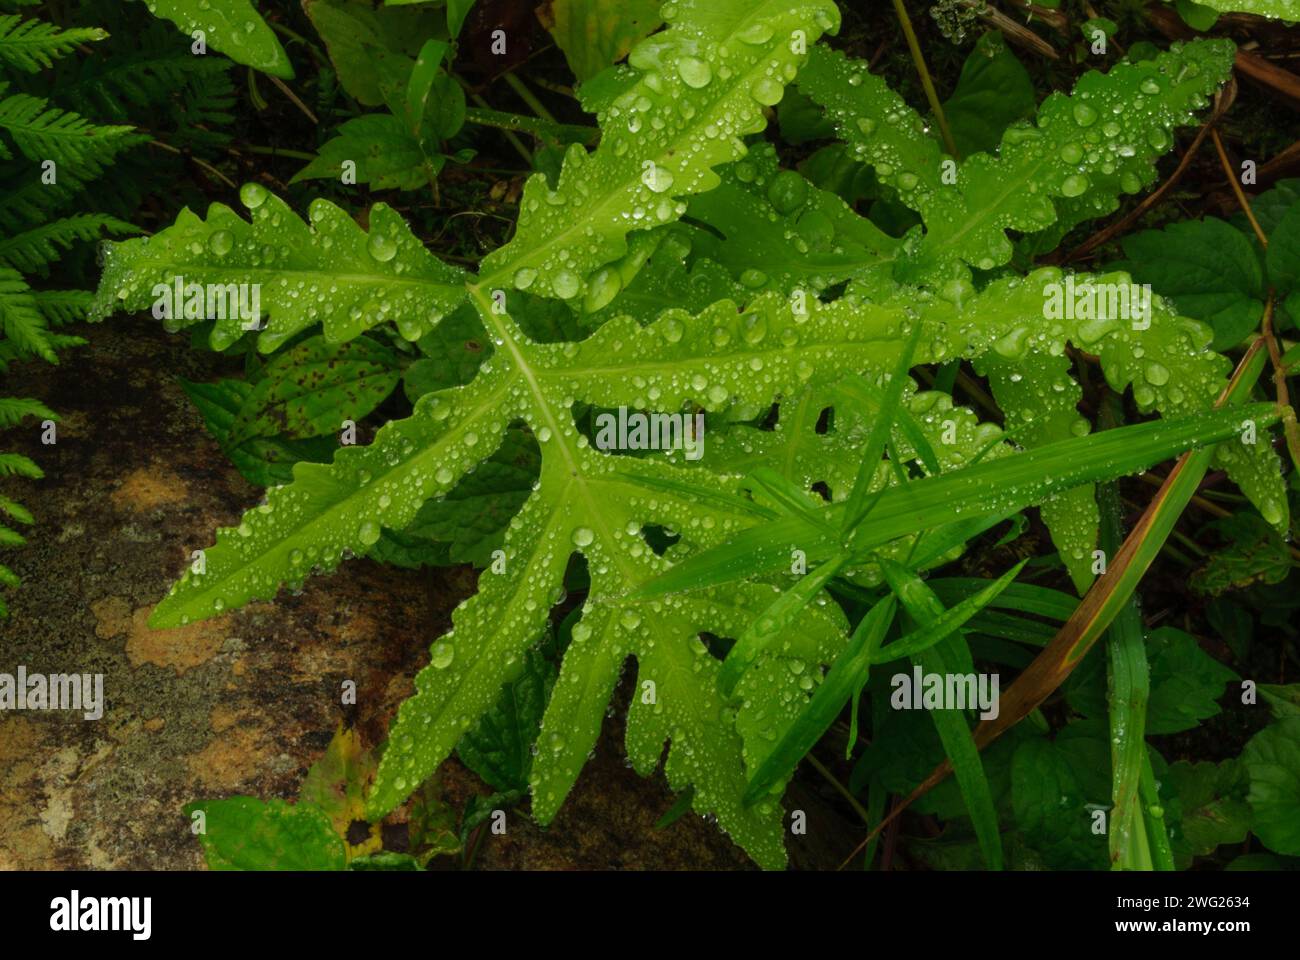 Sensitive Fern, Onoclea sensibilis, growing in the West Canada Lake Wilderness Area in the Adirondack Mountains Of New York State Stock Photo